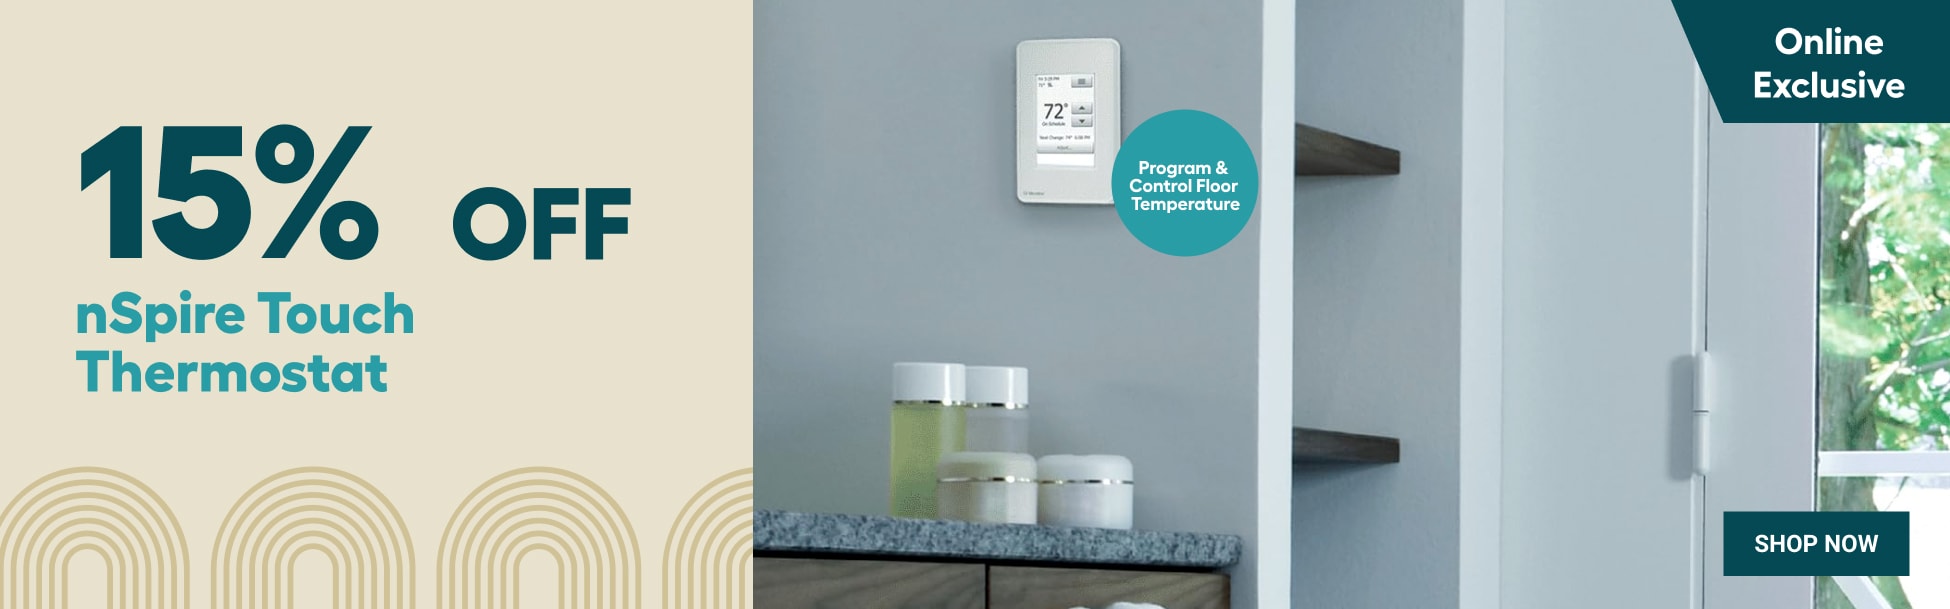 nSpire Touch Thermostat